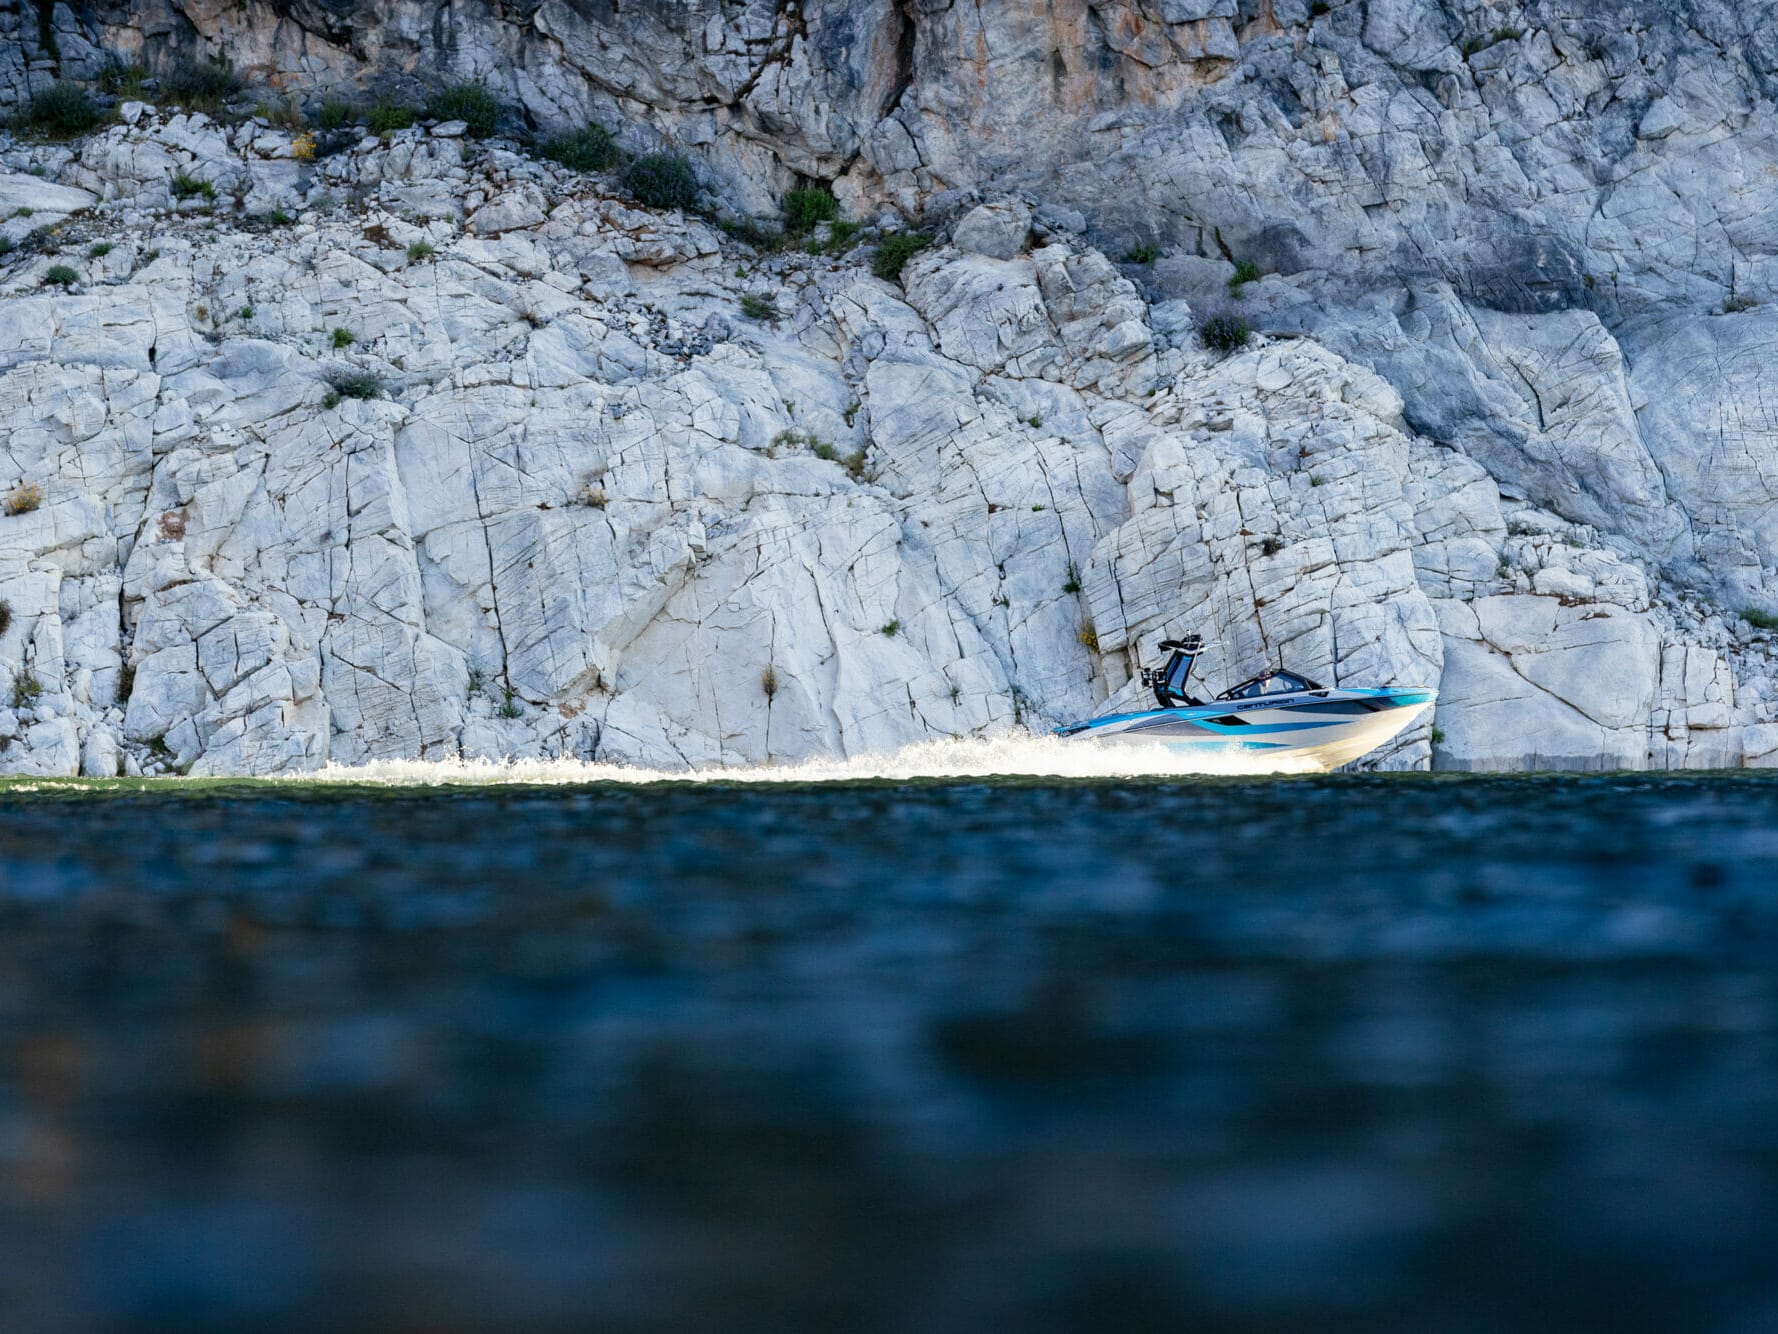 A person is riding a jet ski near a rocky cliff.